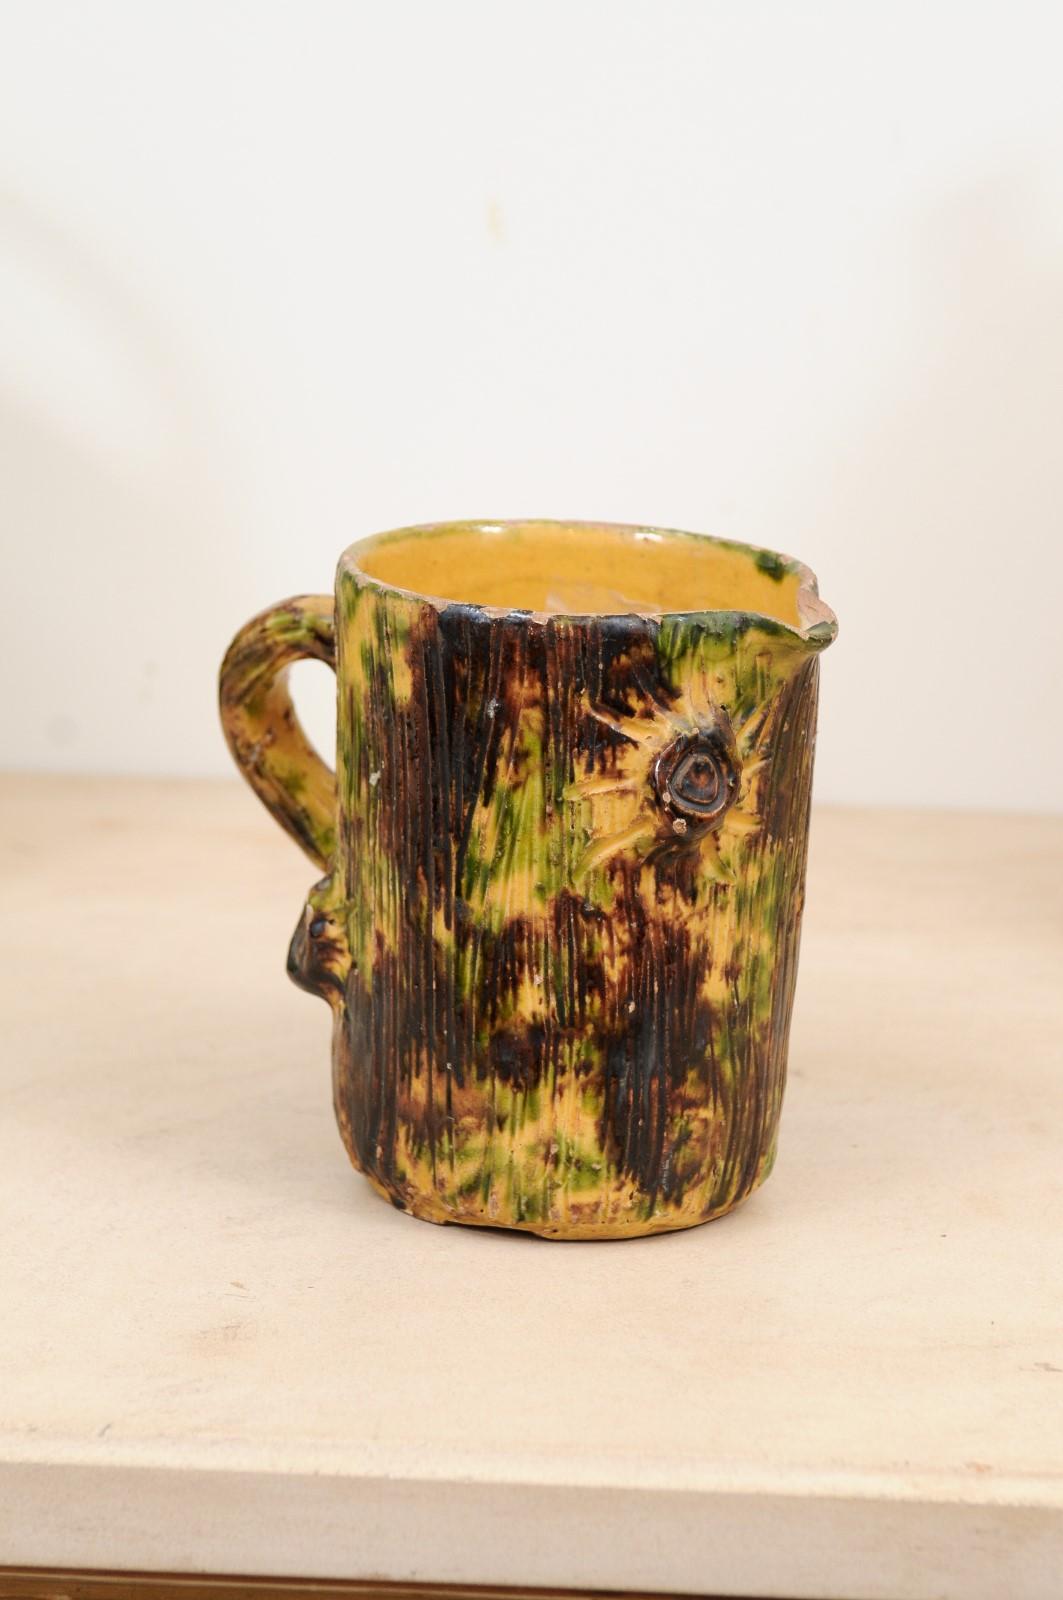 A French glazed pottery pitcher from the 19th century, with textured finish and floral motifs. Created in France during the 19th century, this rustic pitcher features a brown textured glaze adorned with green and yellow accents and a floral motif.